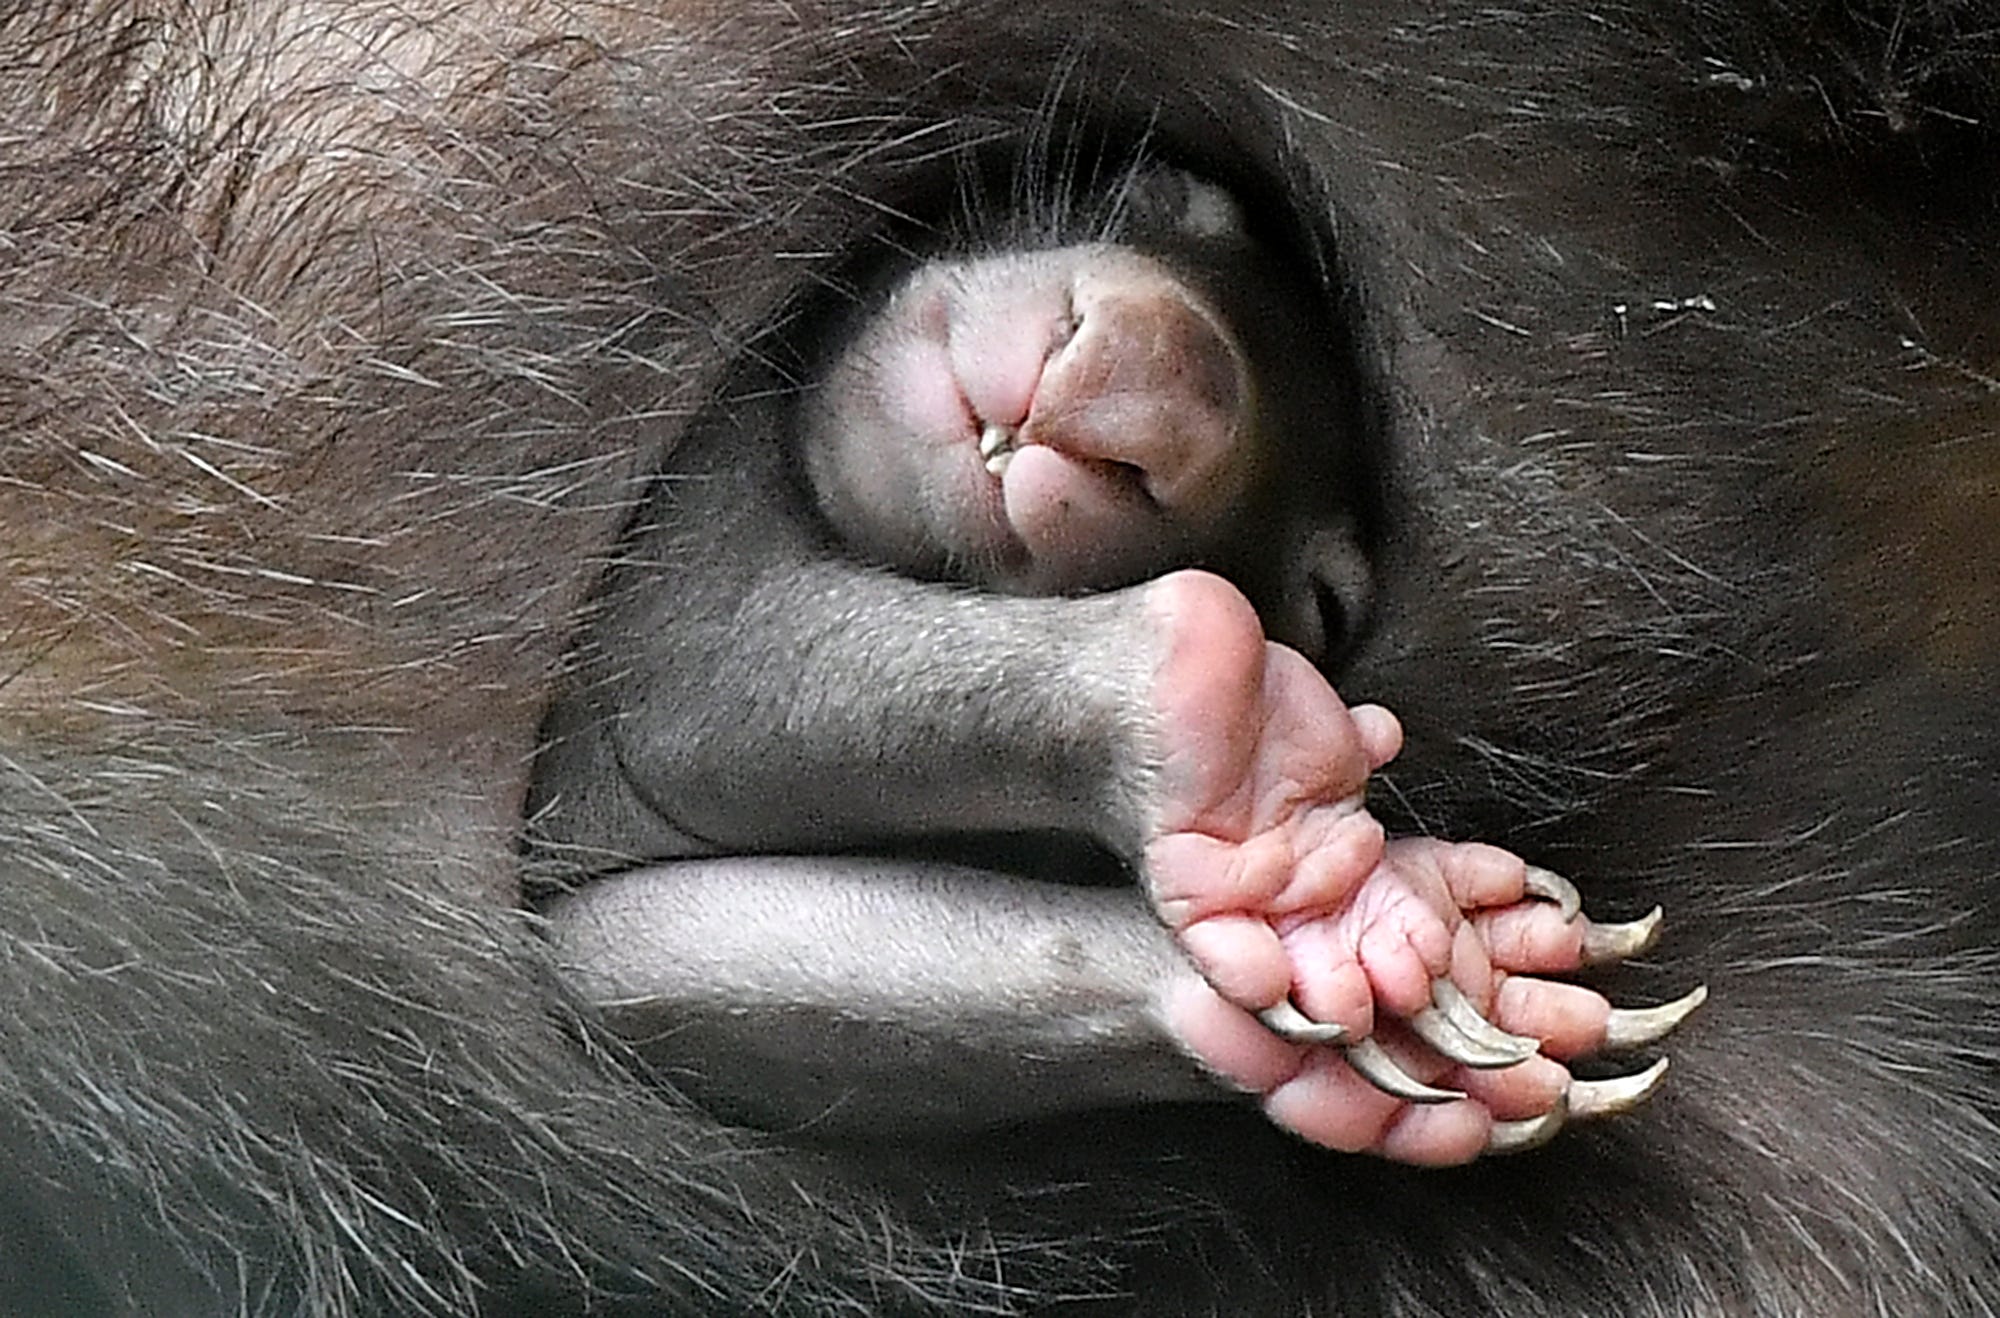 The new born wombat baby APARI looks out of its mothers pouch at the zoo in Duisburg, Germany. Wombat mother TINSEL once was found in the pouch of its dead mother on a street in Australia and was raised by zookeepers before she came to Germany. The z